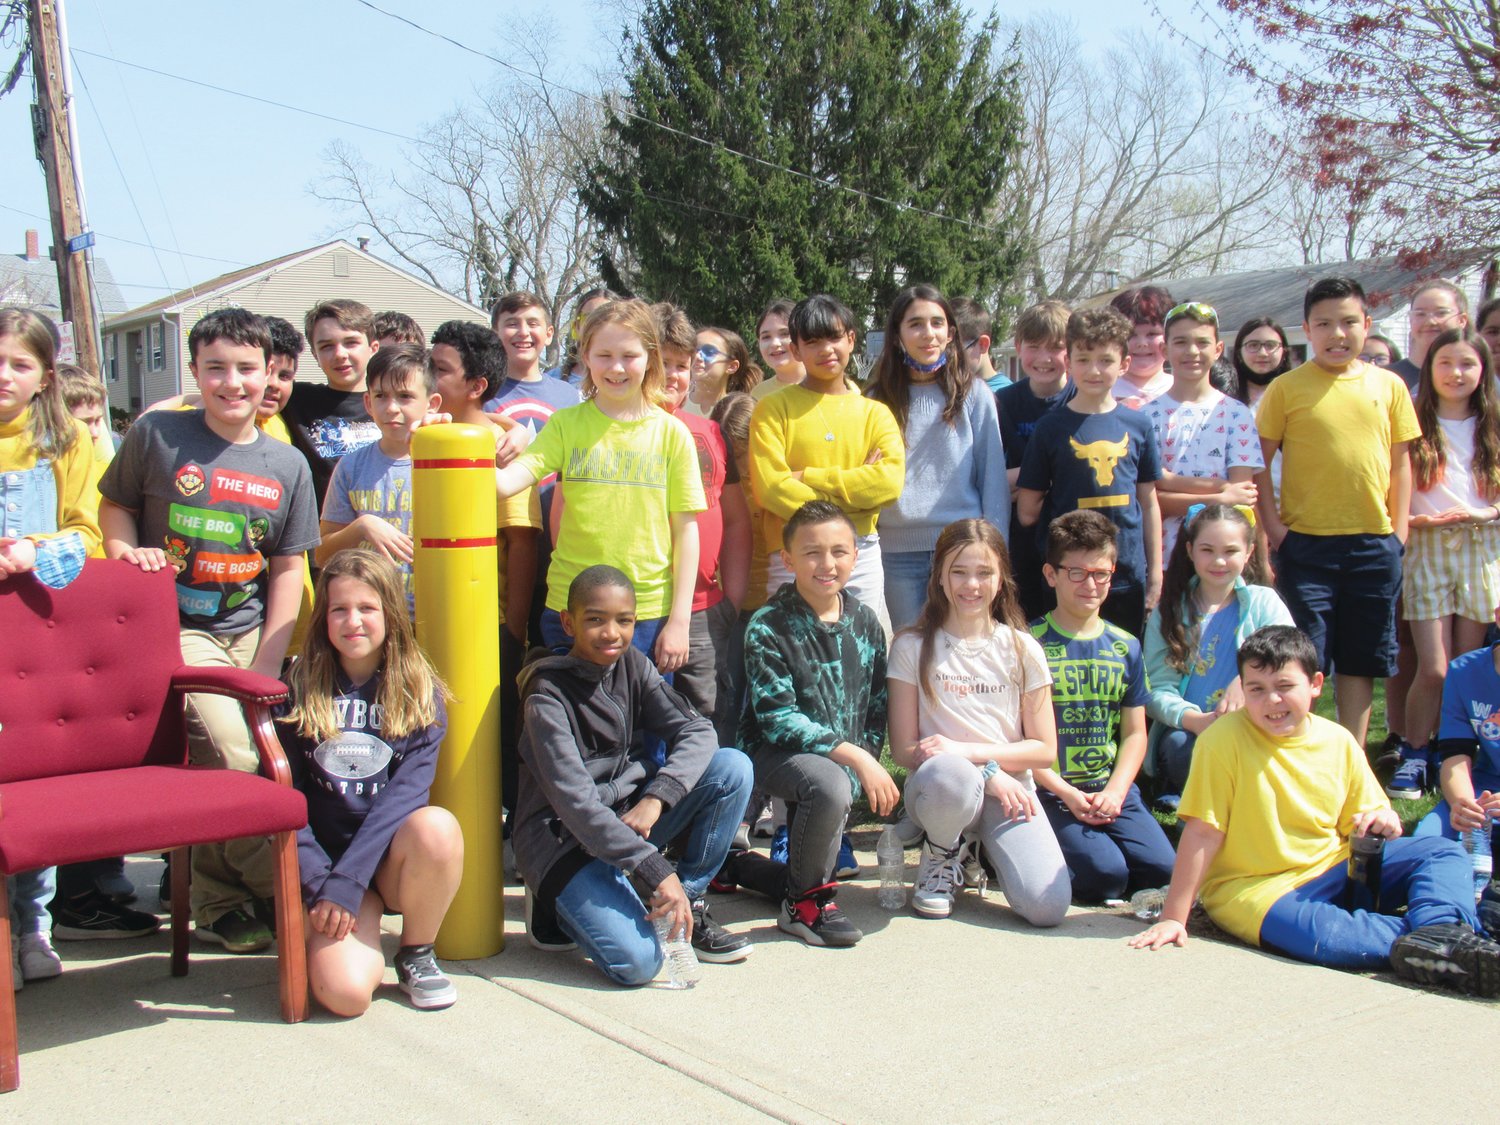 FANTASTIC FUNDRAISERS: Students at Winsor Hill Elementary School stopped during their recent and highly-successful “Walk for the Ukraine” to have this photo taken.